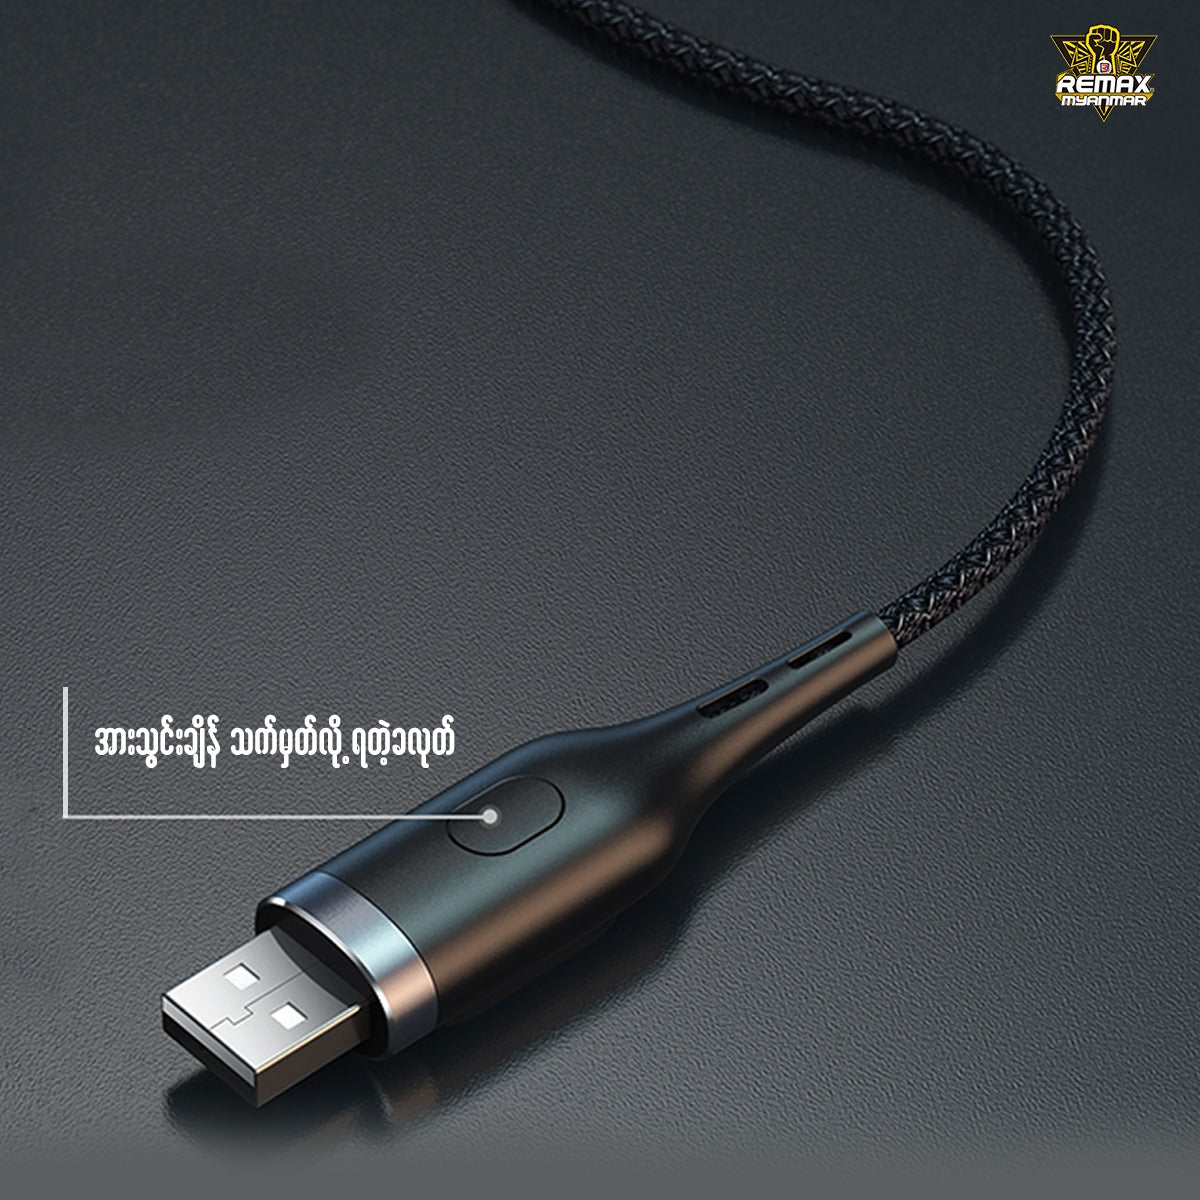 REMAX-RC-096I LEADER SMART DISPLAY 2.1A DATA CABLE FOR LIGHTNING,Lightning Cable,iPhone Data Cable,iPhone Charging Cable,iPhone Lightning charging cable ,Best lightning cable for iPhone,Apple iPhone Cable,iPhone USB Cable,Apple Lightning to USB Cable